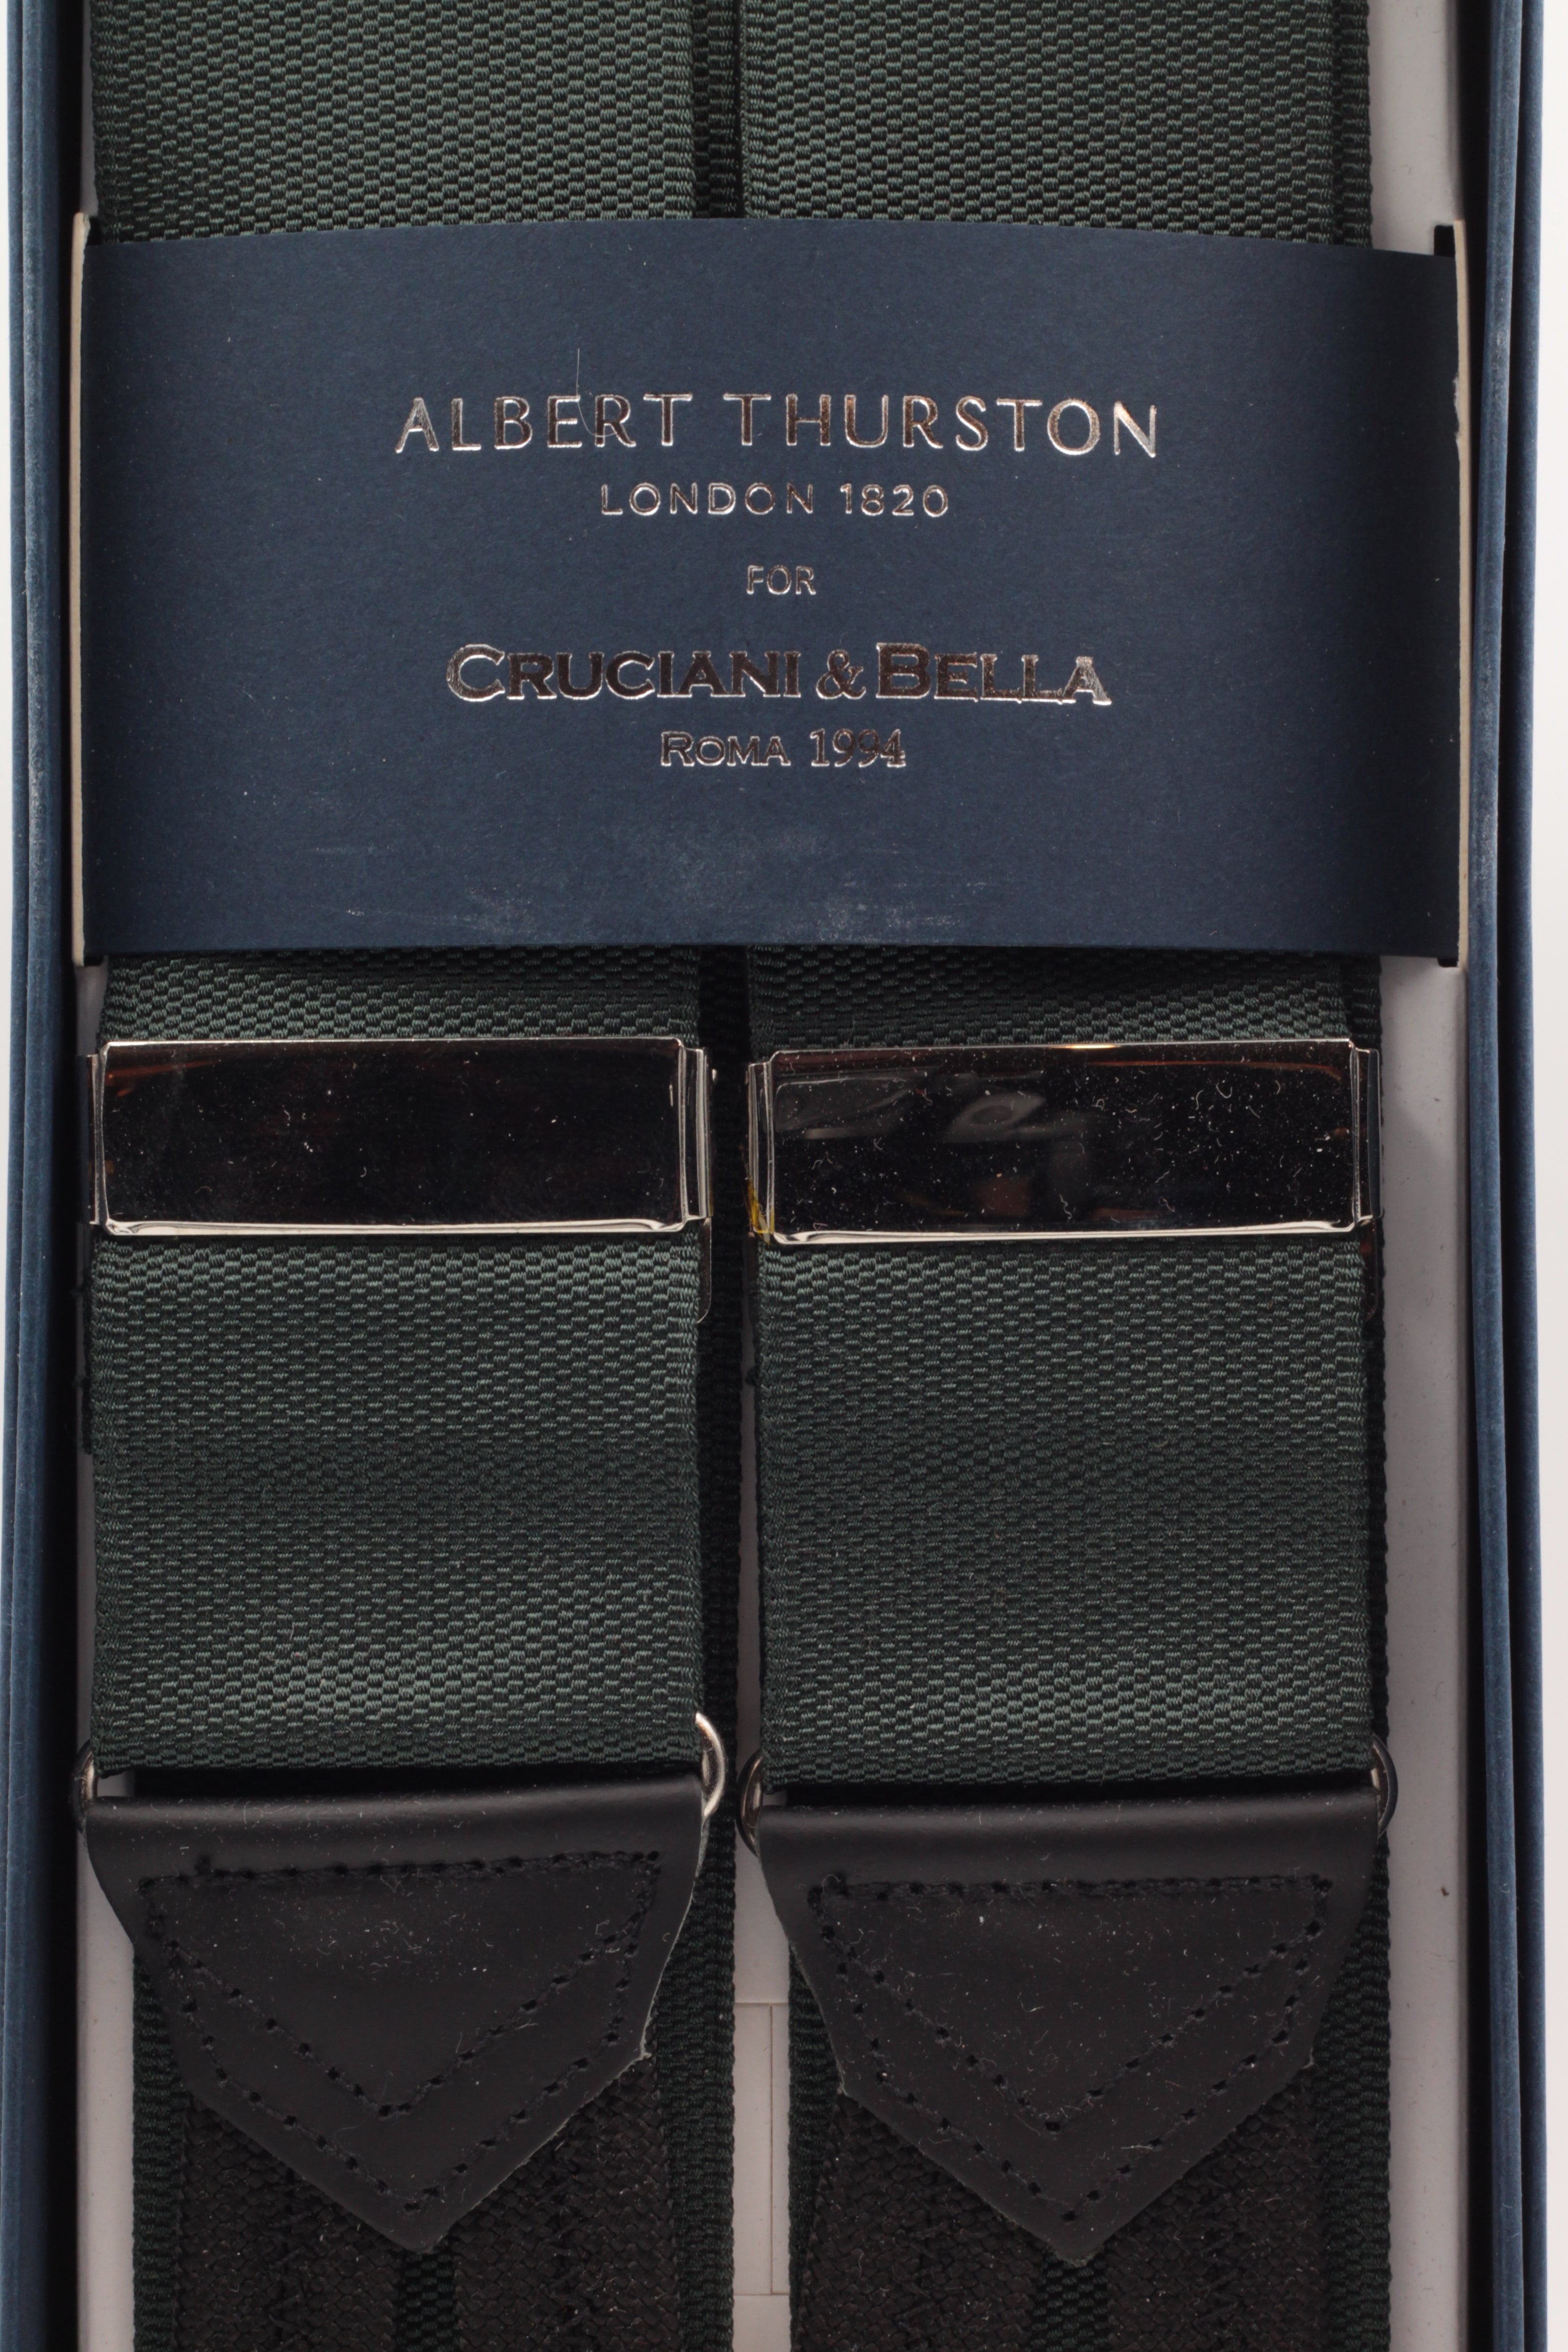 Albert Thurston for Cruciani & Bella Made in England Adjustable Sizing 40 mm Woven Barathea  Forrest green plain Braces Braid ends Y-Shaped Nickel Fittings Size: XL